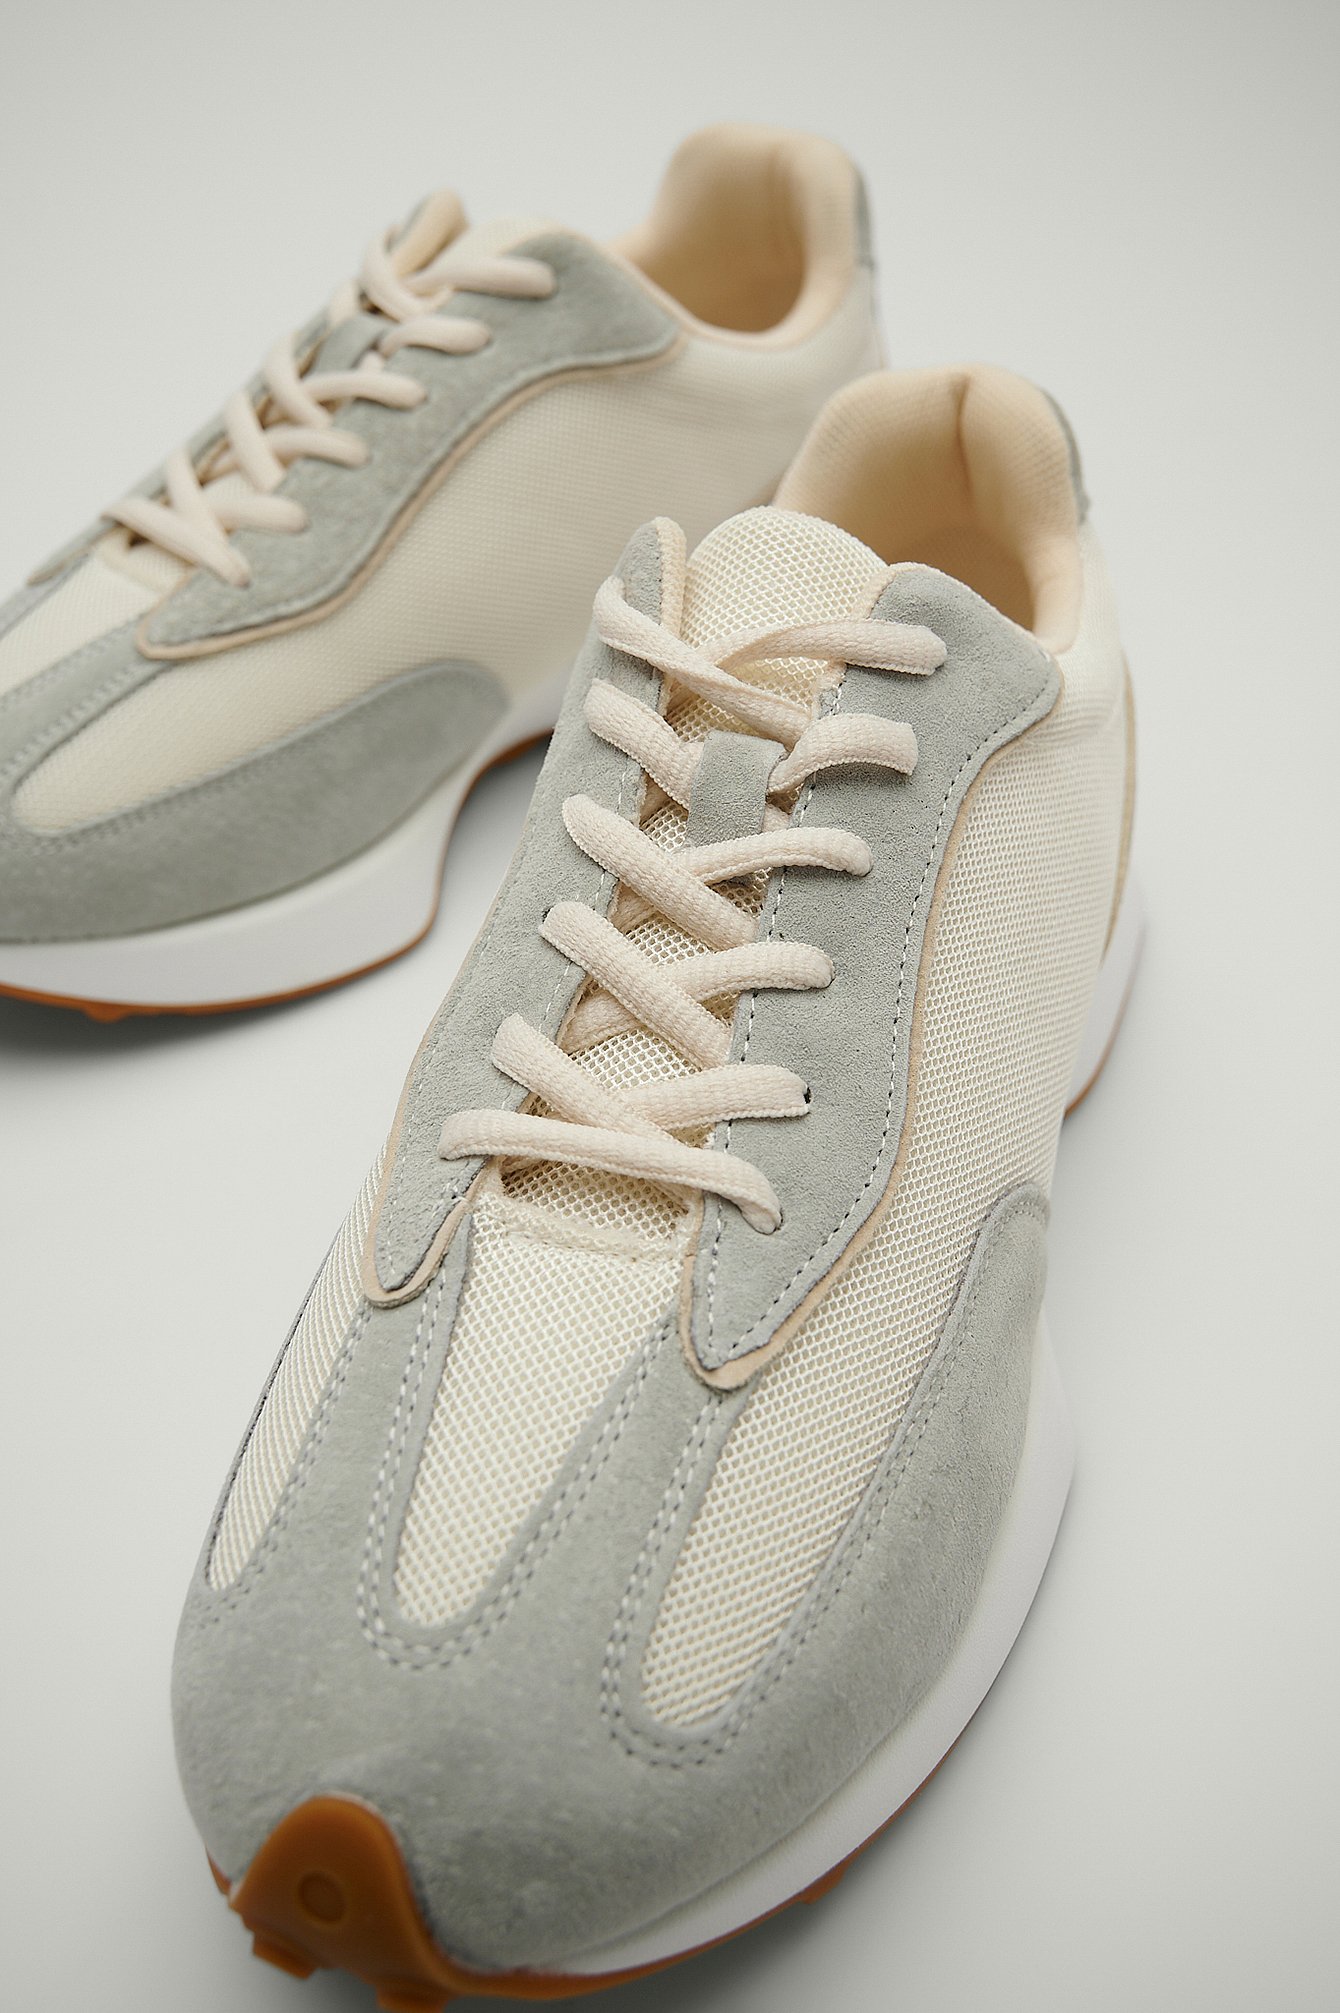 Reme/Blue-Grey Structured Slim Sole Trainers